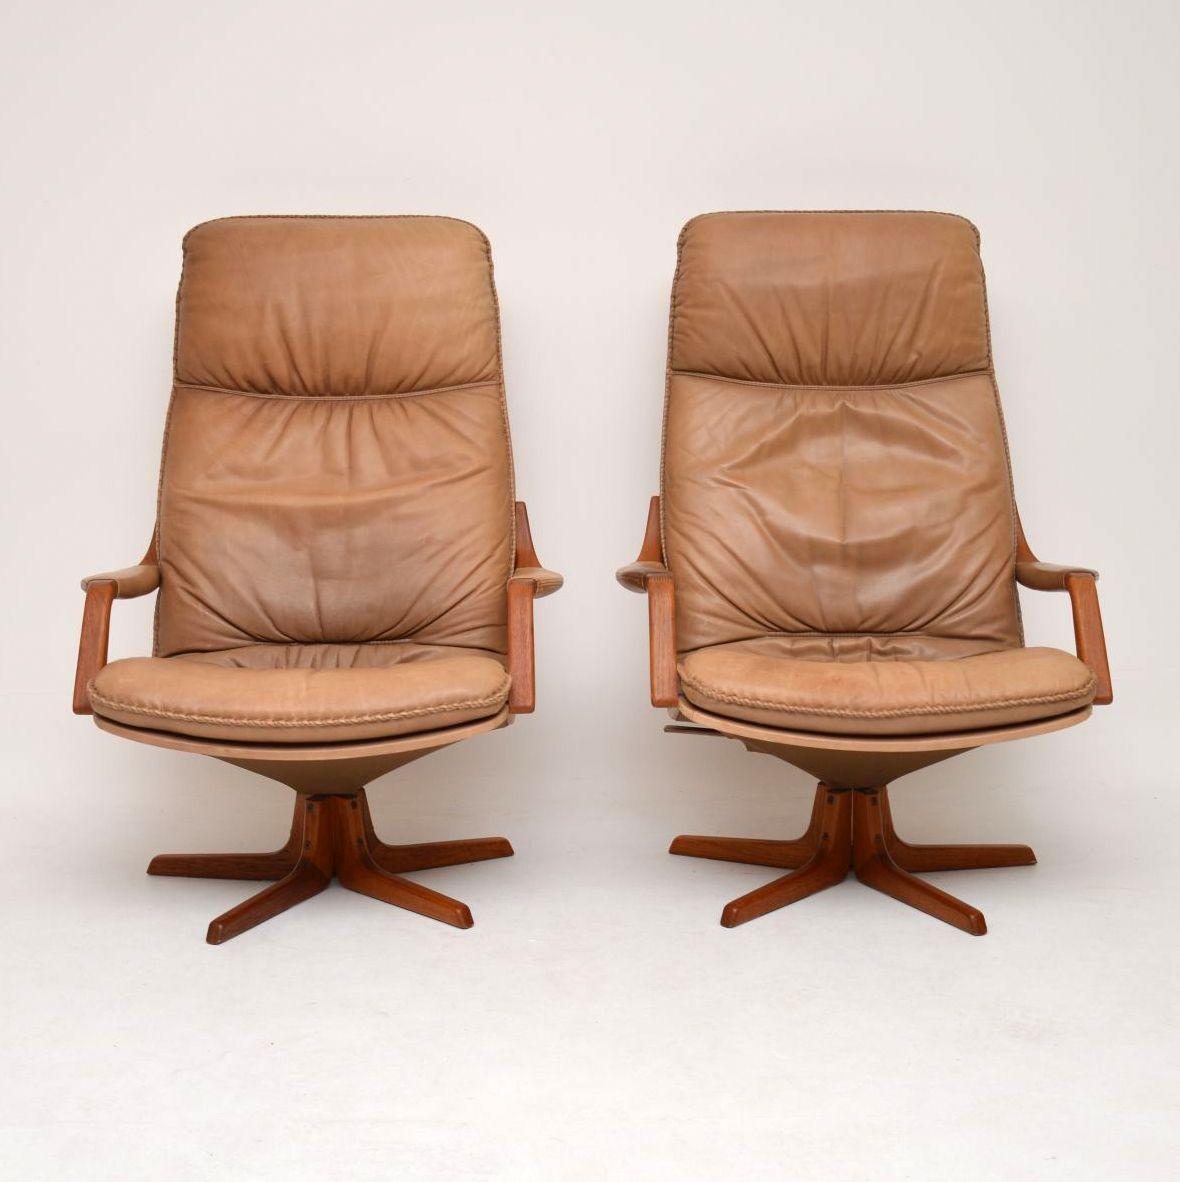 A stunning and extremely comfortable pair of Danish leather armchairs by Berg, these date from around the 1970s. They are of amazing quality, they both swivel, rock and recline, they can be locked into a tilted angle. The light tanned leather has a